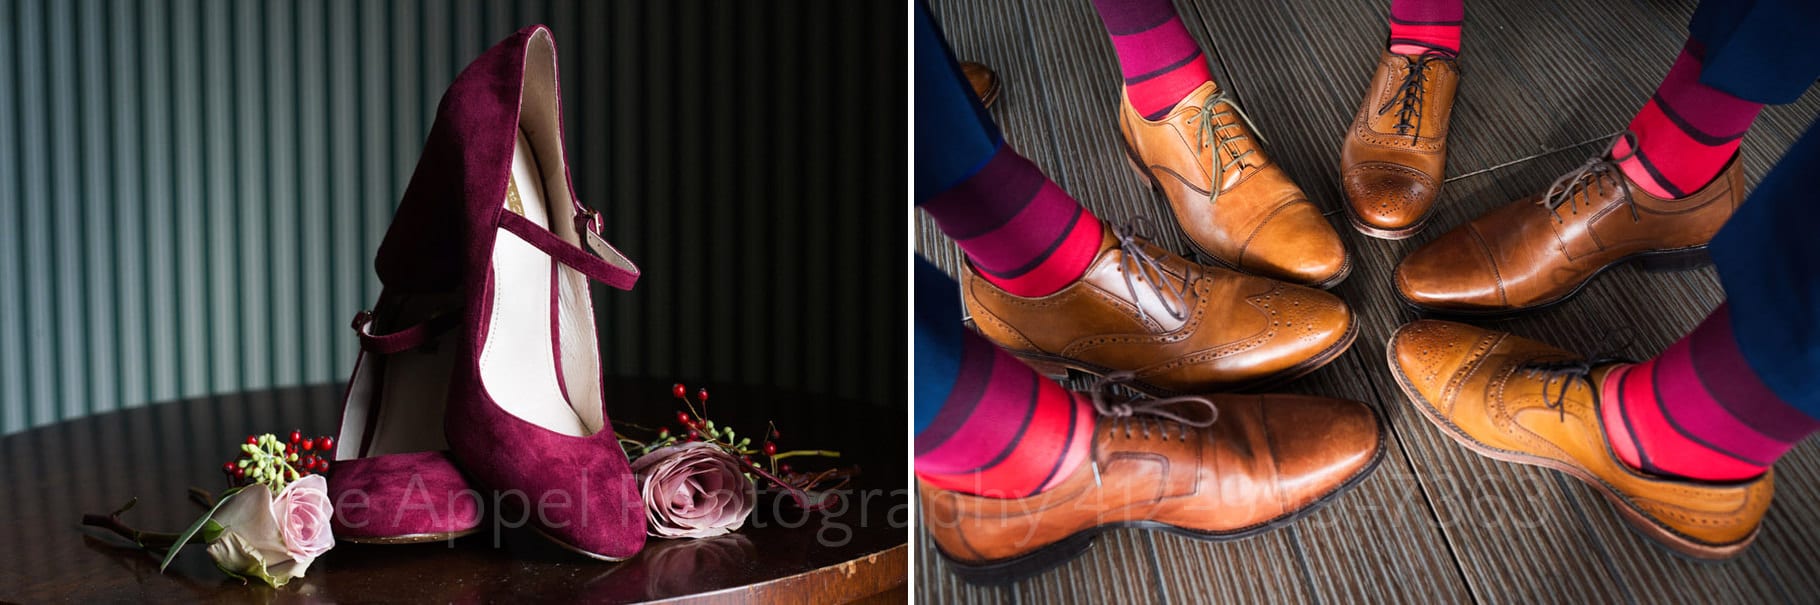 A pair of ruby colored suede womens shoes, several men's brown oxford shoes with colorful pink and purple socks